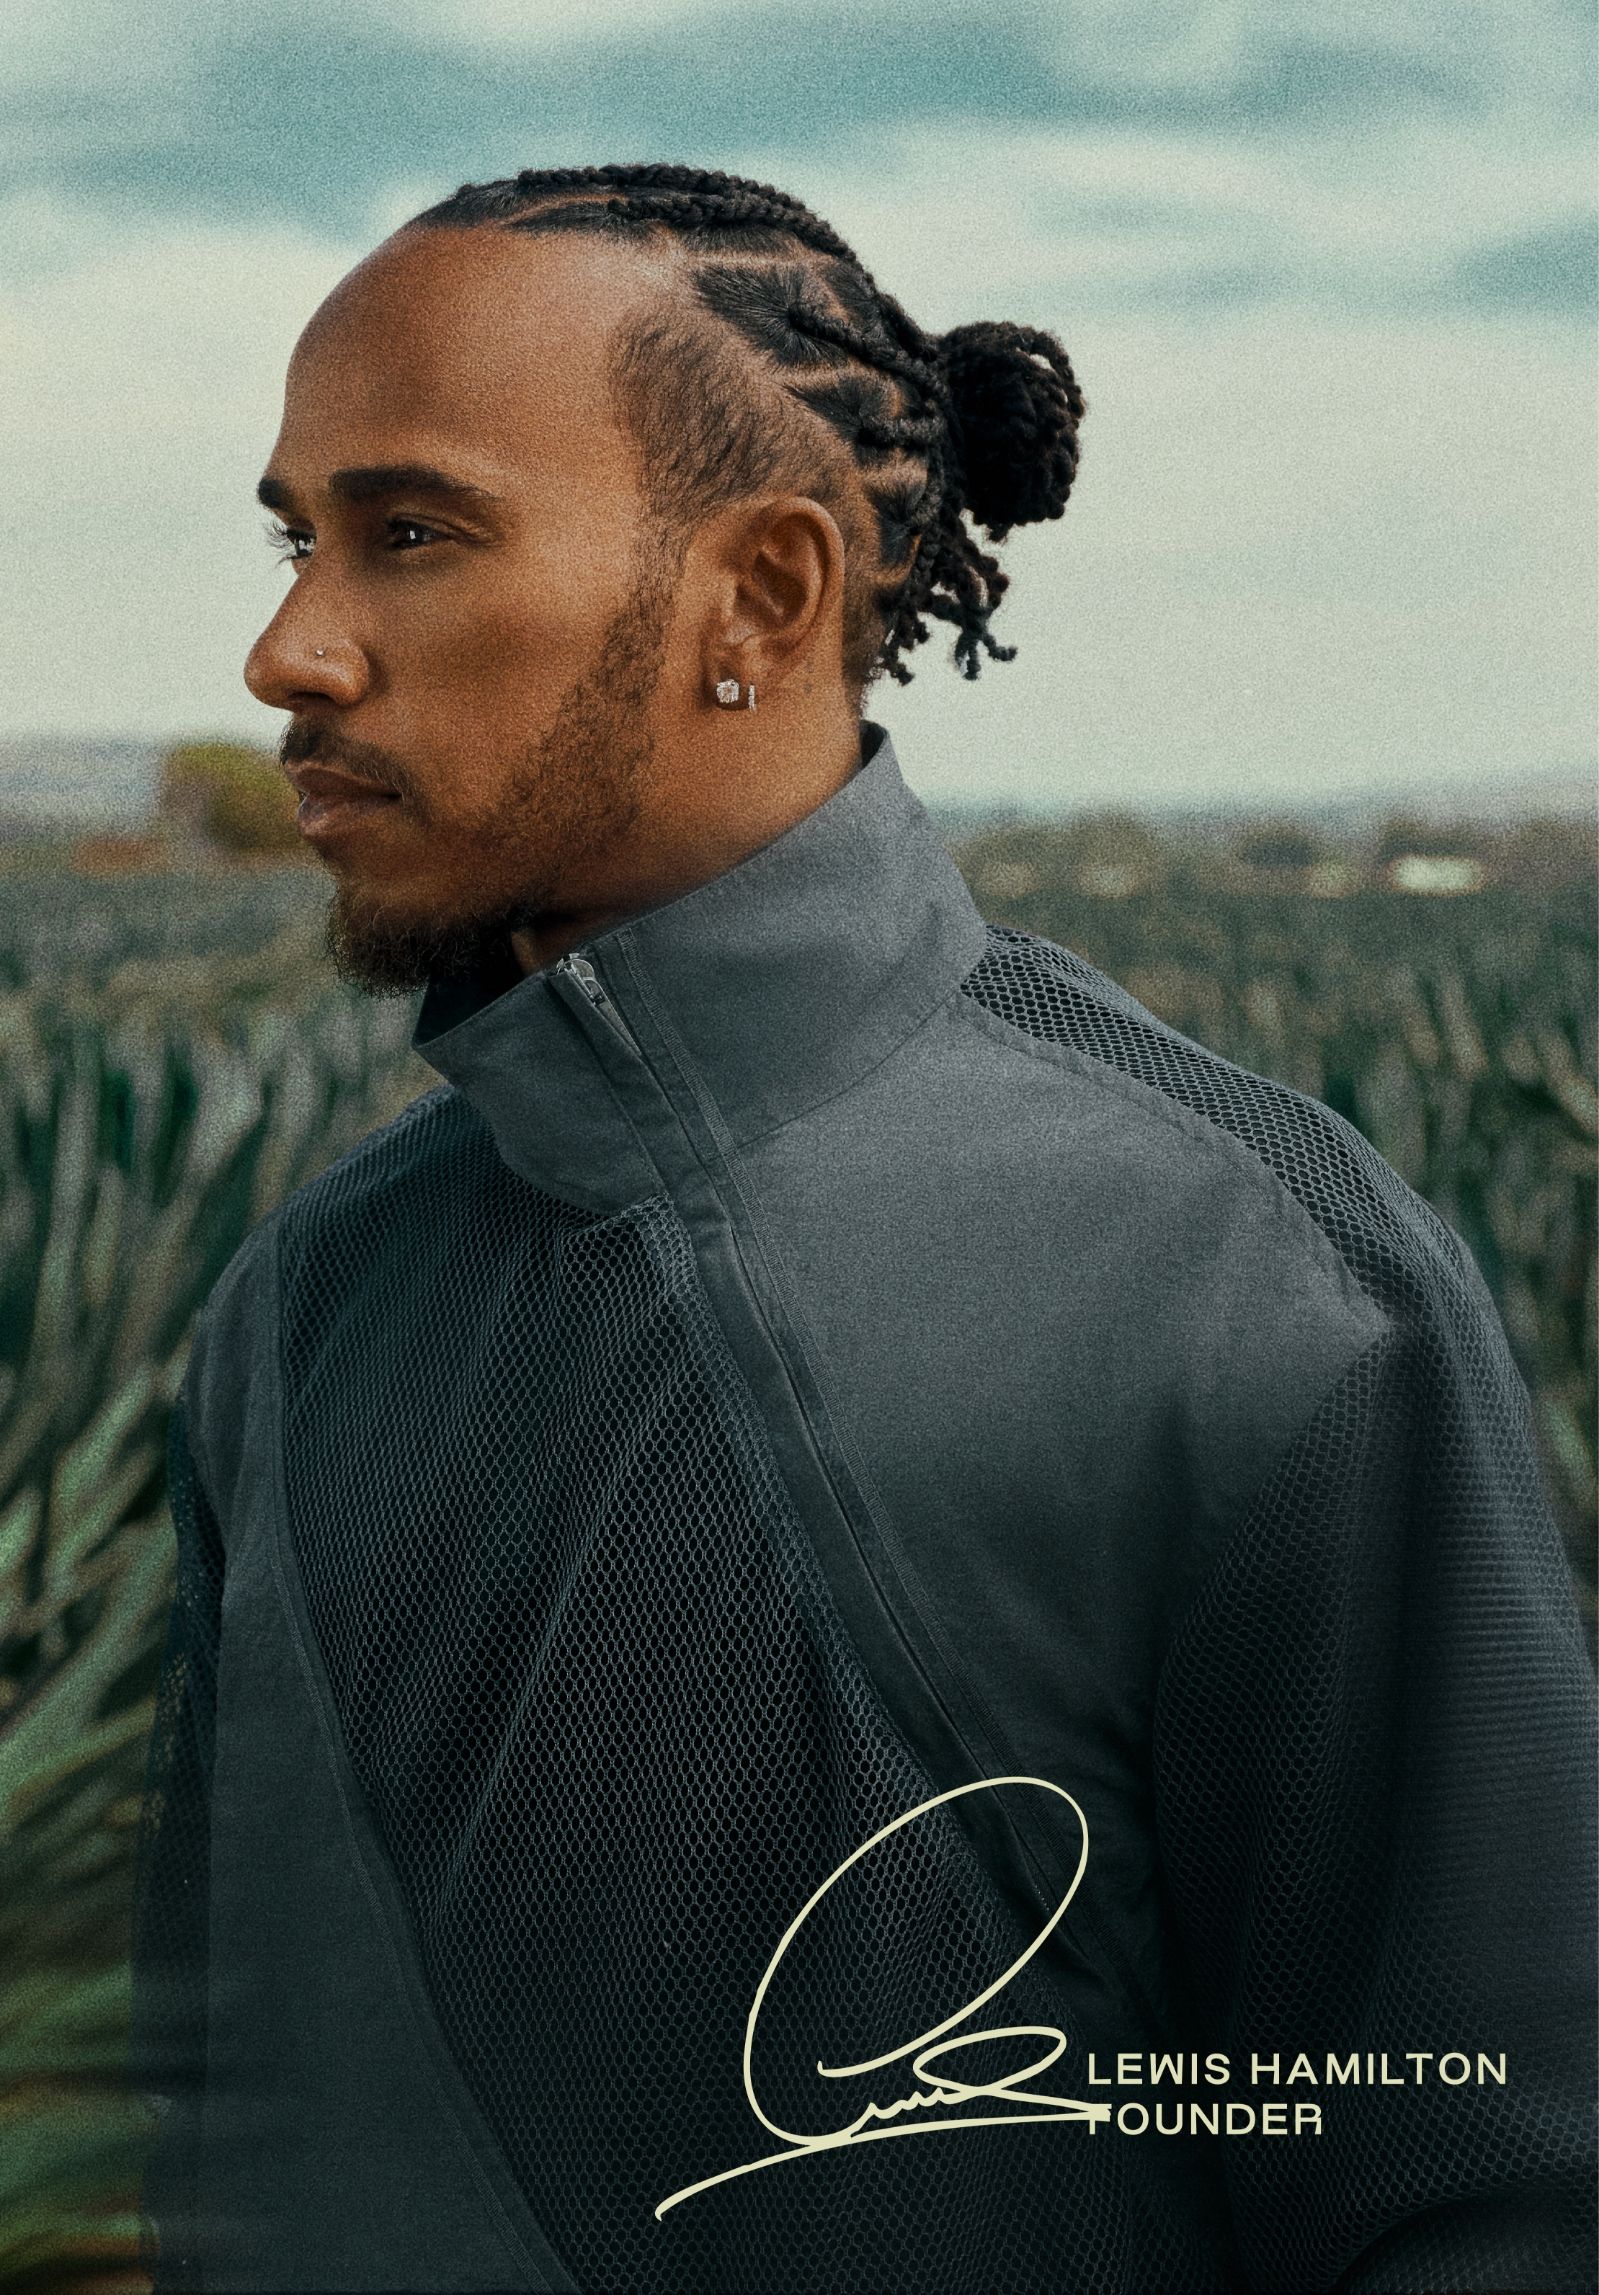 Lewis Hamilton, founder, in profile standing in agave field